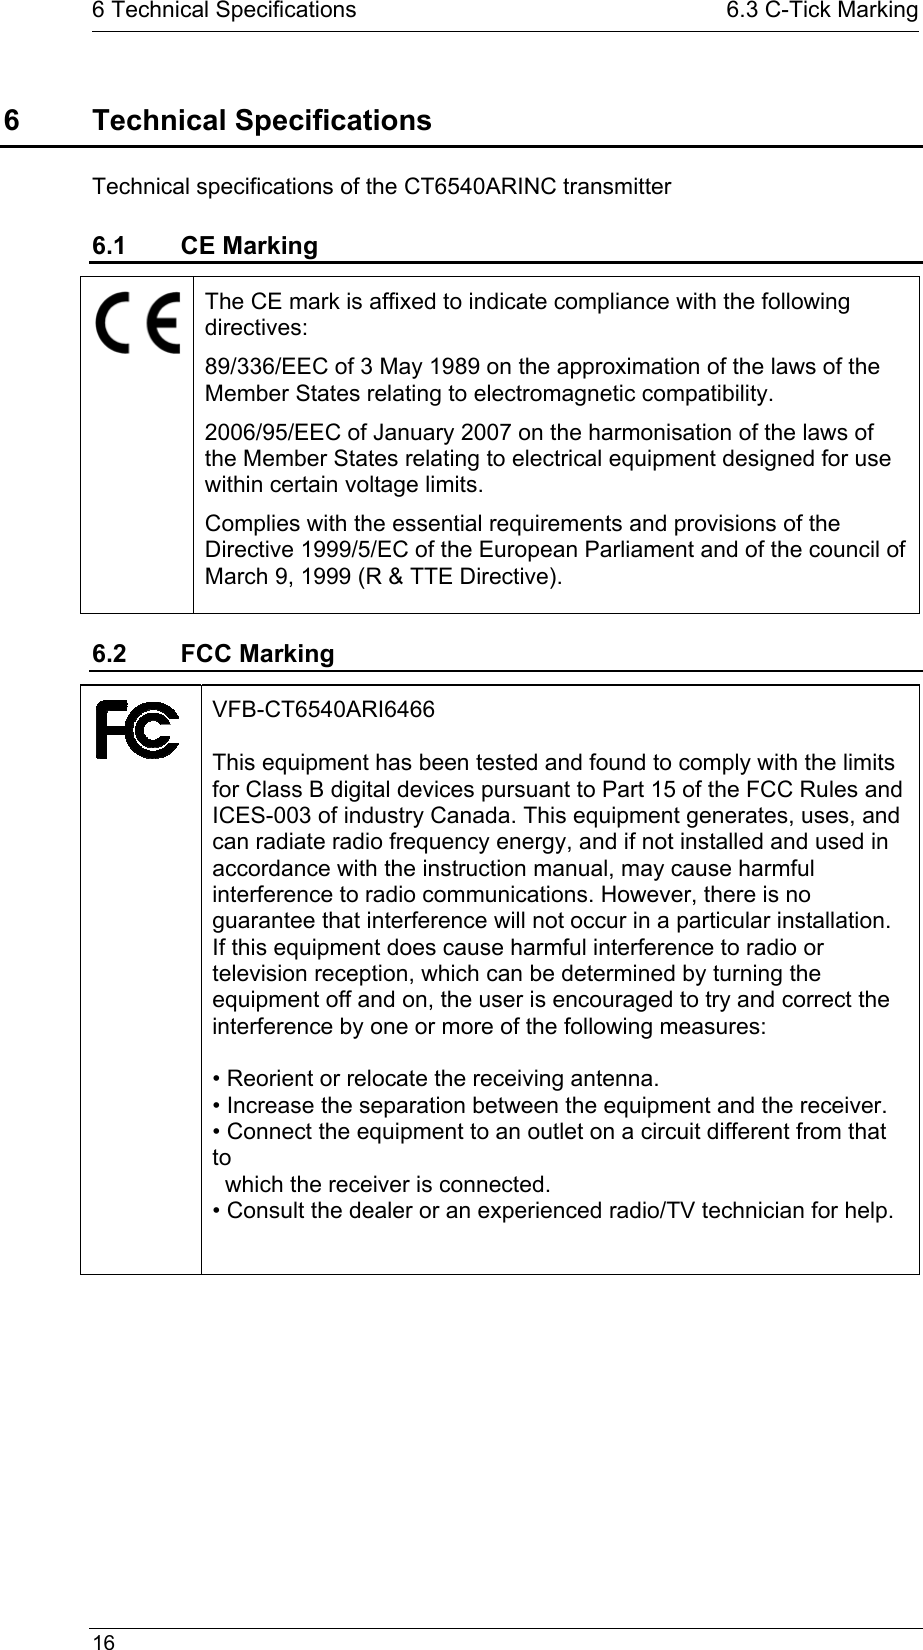   16  6 Technical Specifications  6.3 C-Tick Marking6 Technical Specifications Technical specifications of the CT6540ARINC transmitter 6.1 CE Marking  The CE mark is affixed to indicate compliance with the following directives:  89/336/EEC of 3 May 1989 on the approximation of the laws of the Member States relating to electromagnetic compatibility. 2006/95/EEC of January 2007 on the harmonisation of the laws of the Member States relating to electrical equipment designed for use within certain voltage limits. Complies with the essential requirements and provisions of the Directive 1999/5/EC of the European Parliament and of the council of March 9, 1999 (R &amp; TTE Directive). 6.2 FCC Marking  VFB-CT6540ARI6466  This equipment has been tested and found to comply with the limits for Class B digital devices pursuant to Part 15 of the FCC Rules and ICES-003 of industry Canada. This equipment generates, uses, and can radiate radio frequency energy, and if not installed and used in accordance with the instruction manual, may cause harmful interference to radio communications. However, there is no guarantee that interference will not occur in a particular installation. If this equipment does cause harmful interference to radio or television reception, which can be determined by turning the equipment off and on, the user is encouraged to try and correct the interference by one or more of the following measures:  • Reorient or relocate the receiving antenna. • Increase the separation between the equipment and the receiver. • Connect the equipment to an outlet on a circuit different from that to    which the receiver is connected. • Consult the dealer or an experienced radio/TV technician for help.  